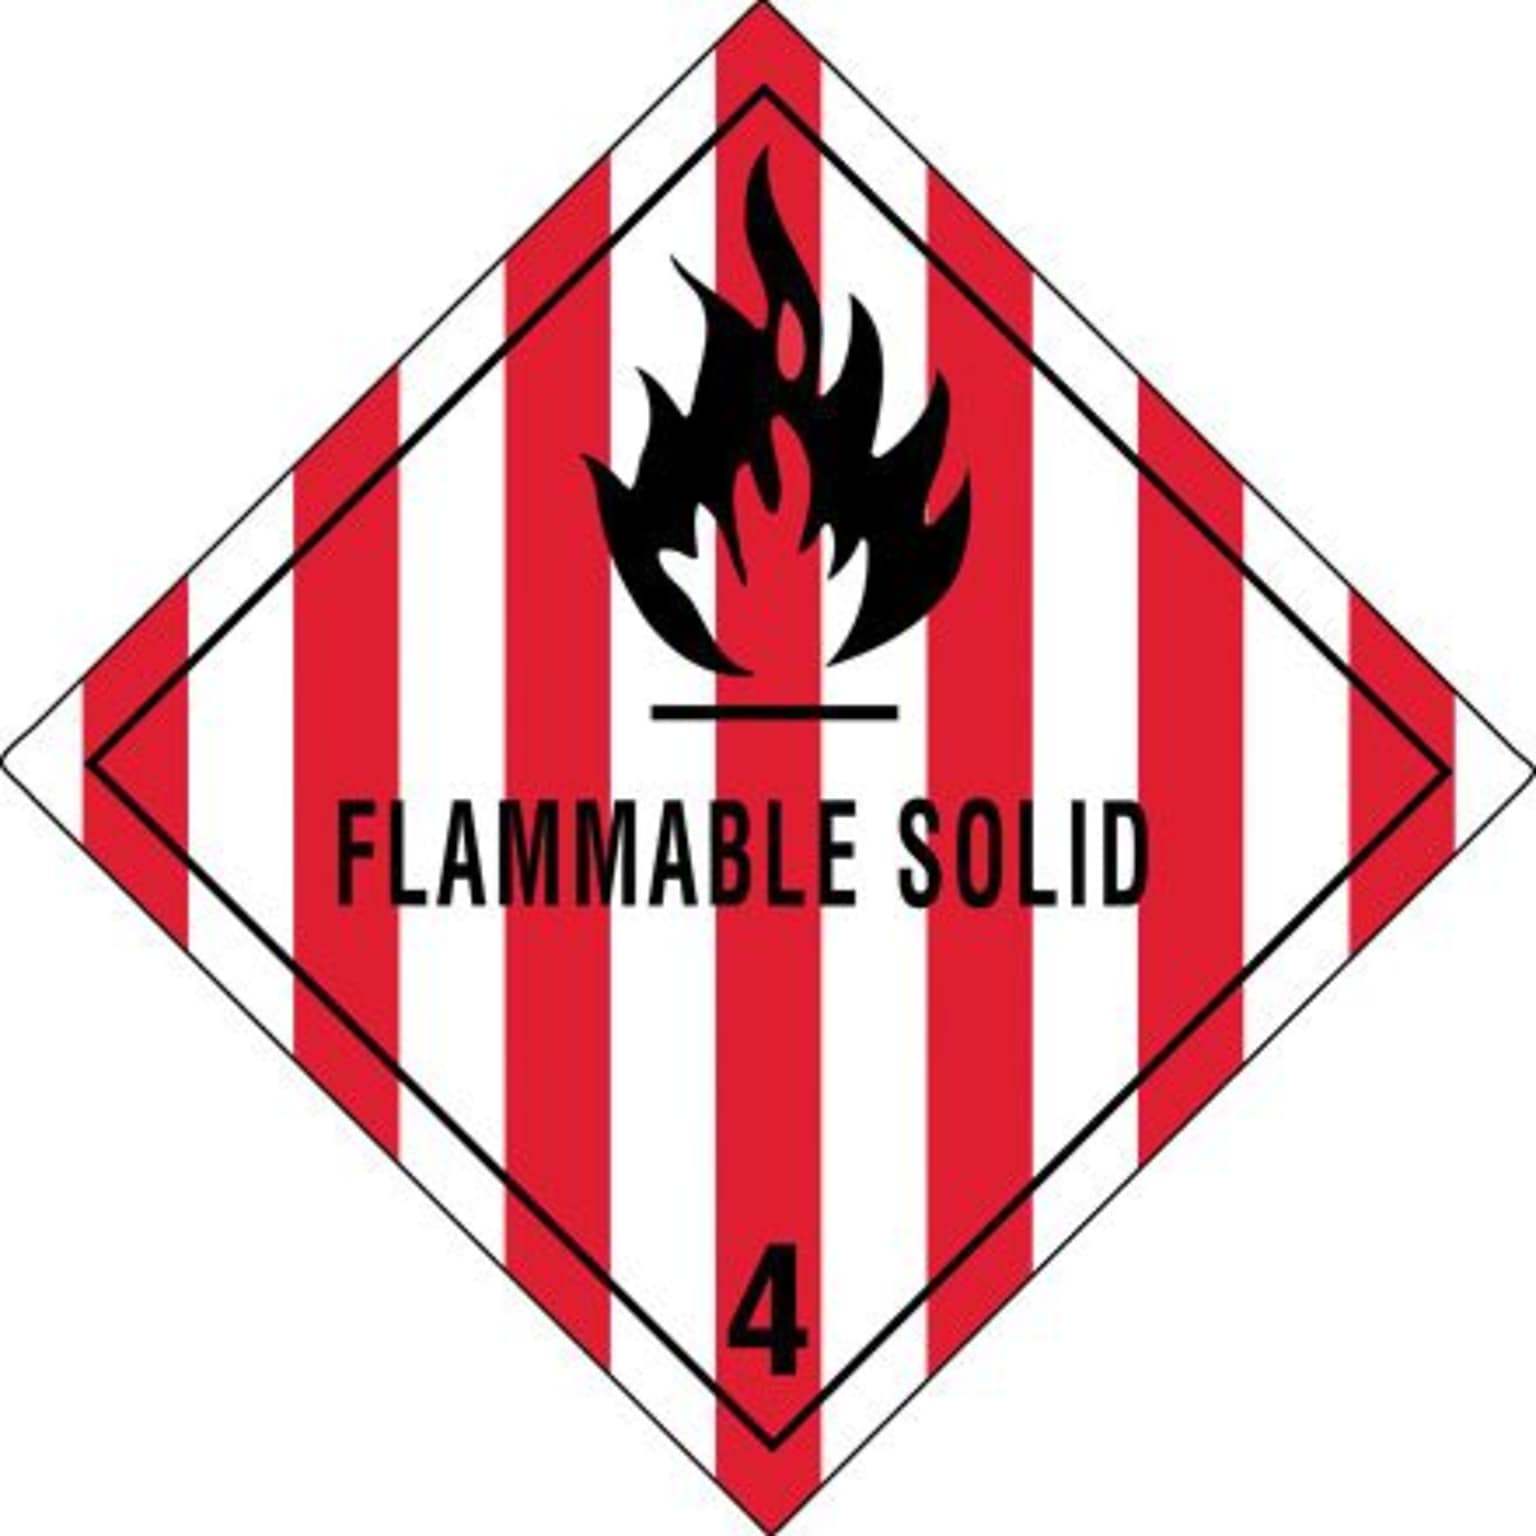 Tape Logic Flammable Solid - 4 Tape Logic Shipping Label, 4 x 4, 500/Roll